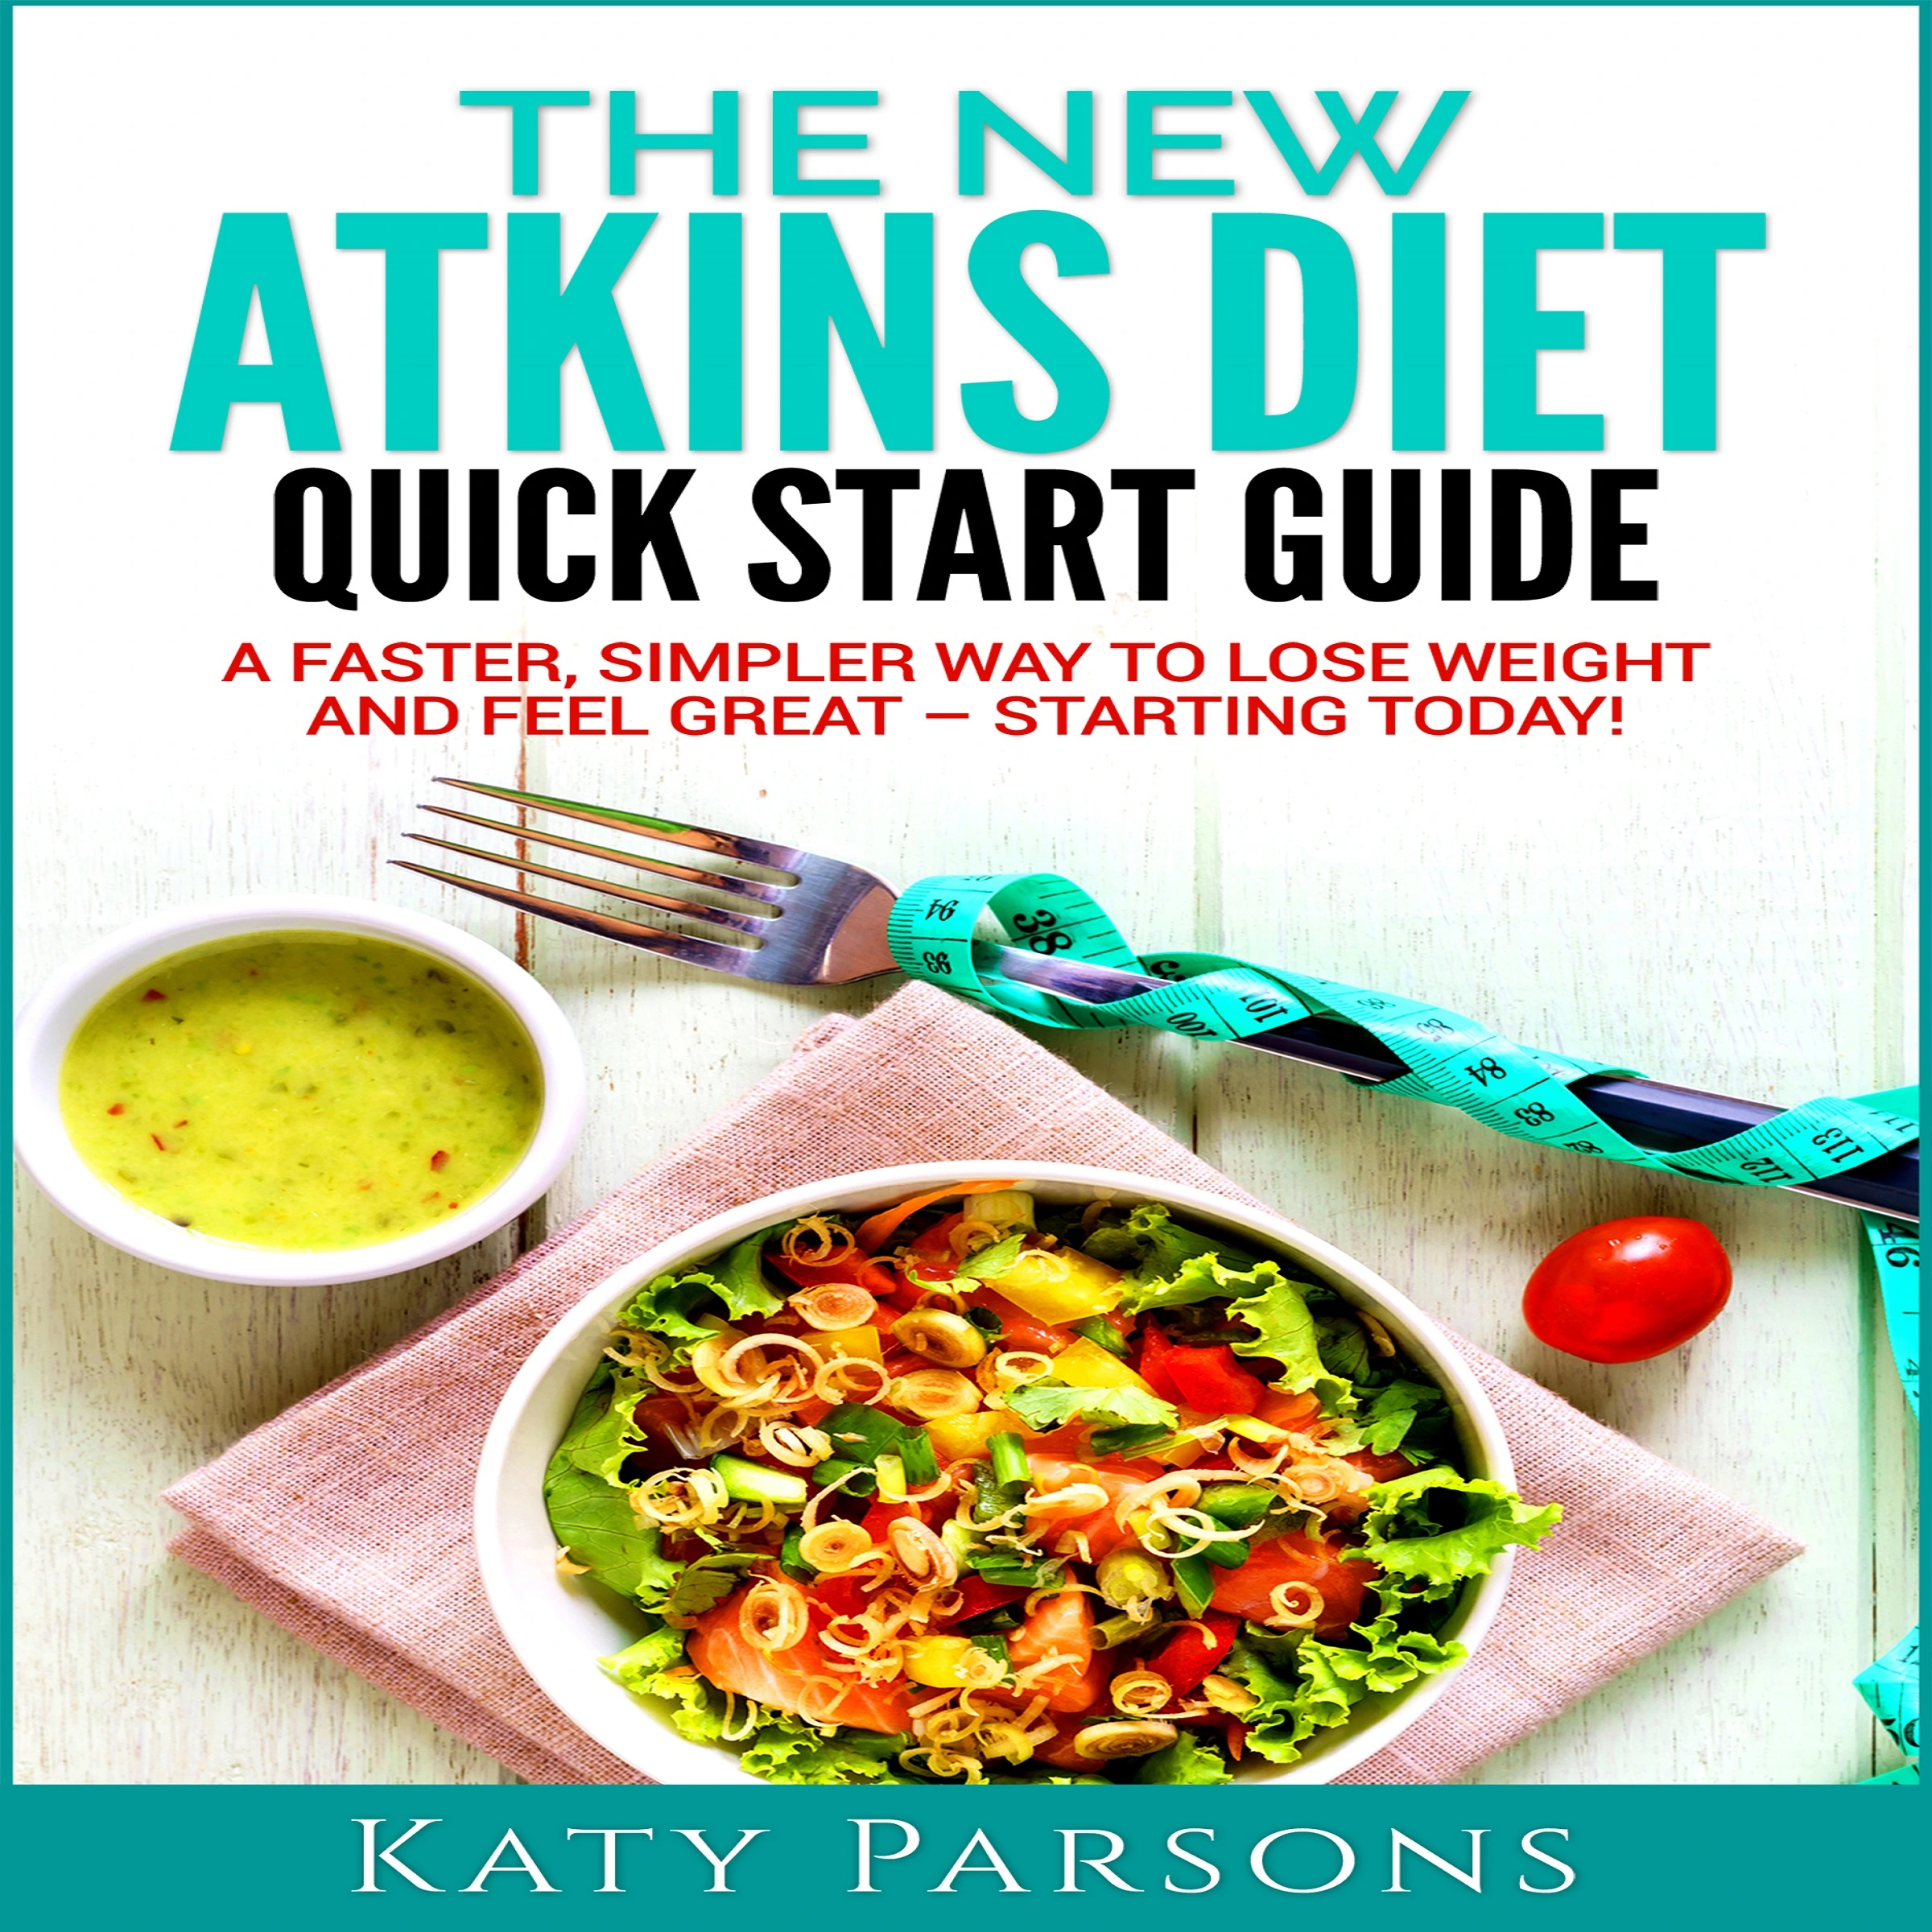 The New Atkins Diet Quick Start Guide: A Faster, Simpler Way to Lose Weight and Feel Great - Starting Today! Audiobook by Katy Parsons